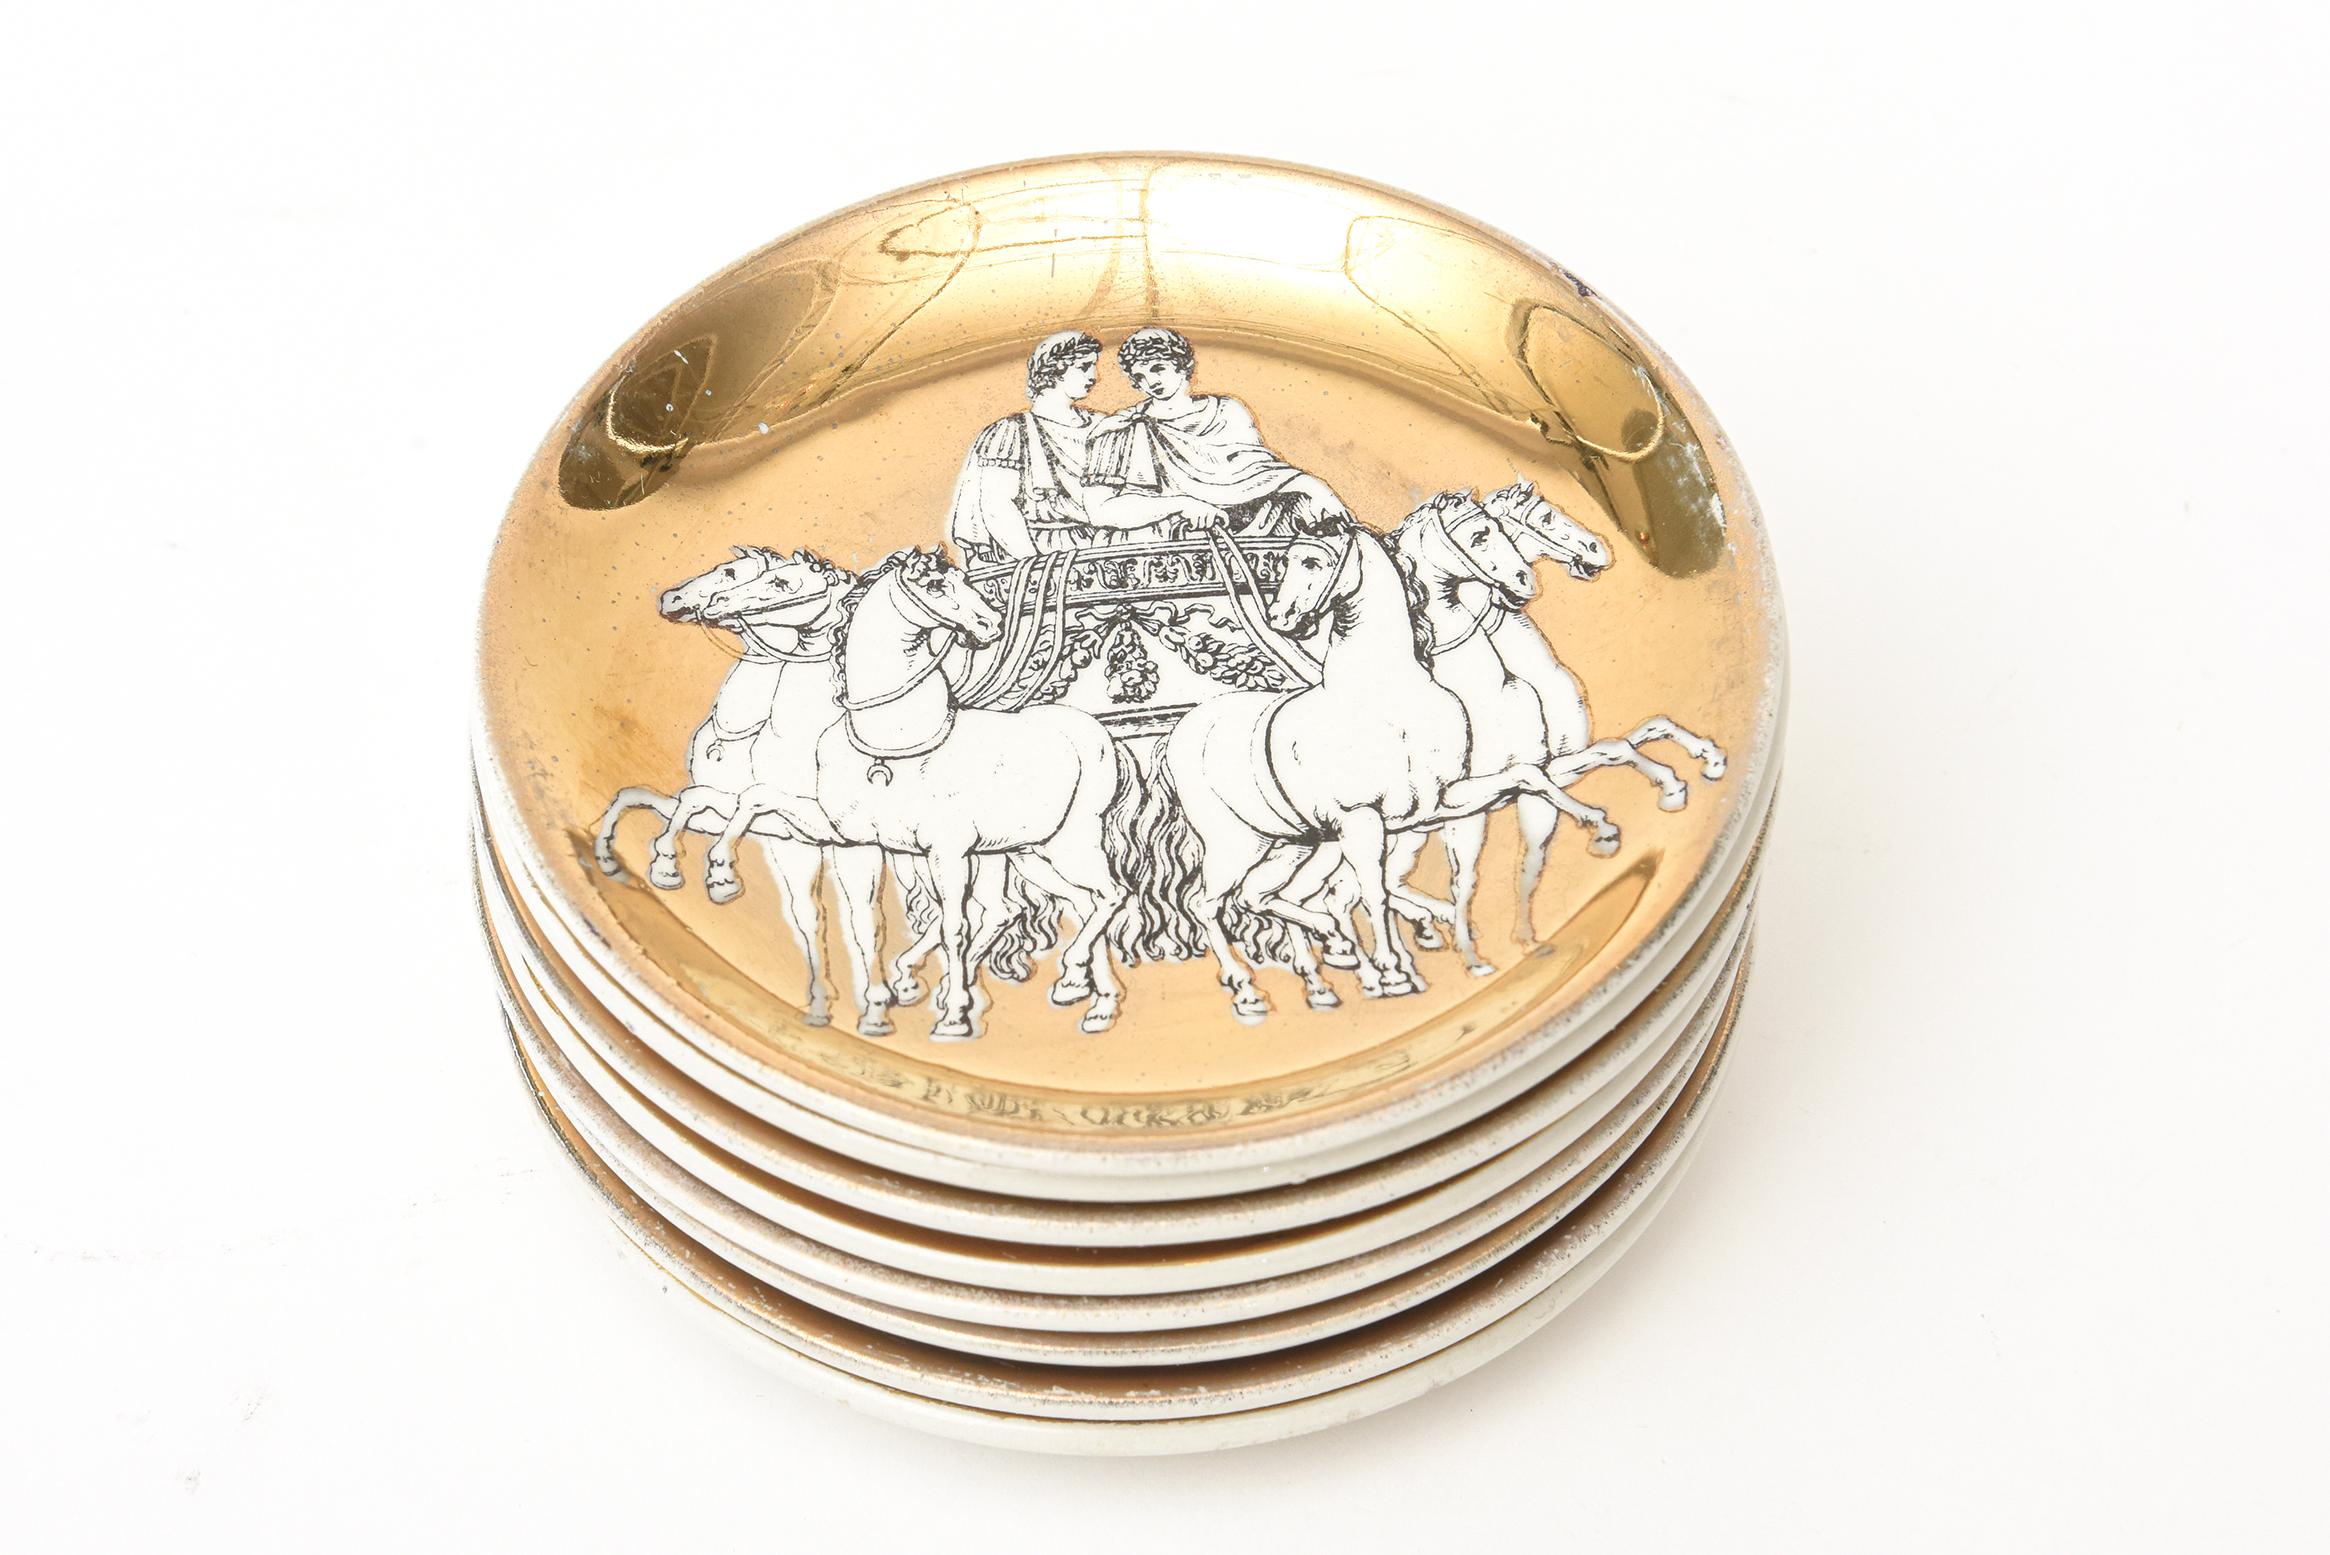 Gold Piero Fornasetti Gilded Porcelain Chariot Coasters or Nut Dishes Vintage Barware